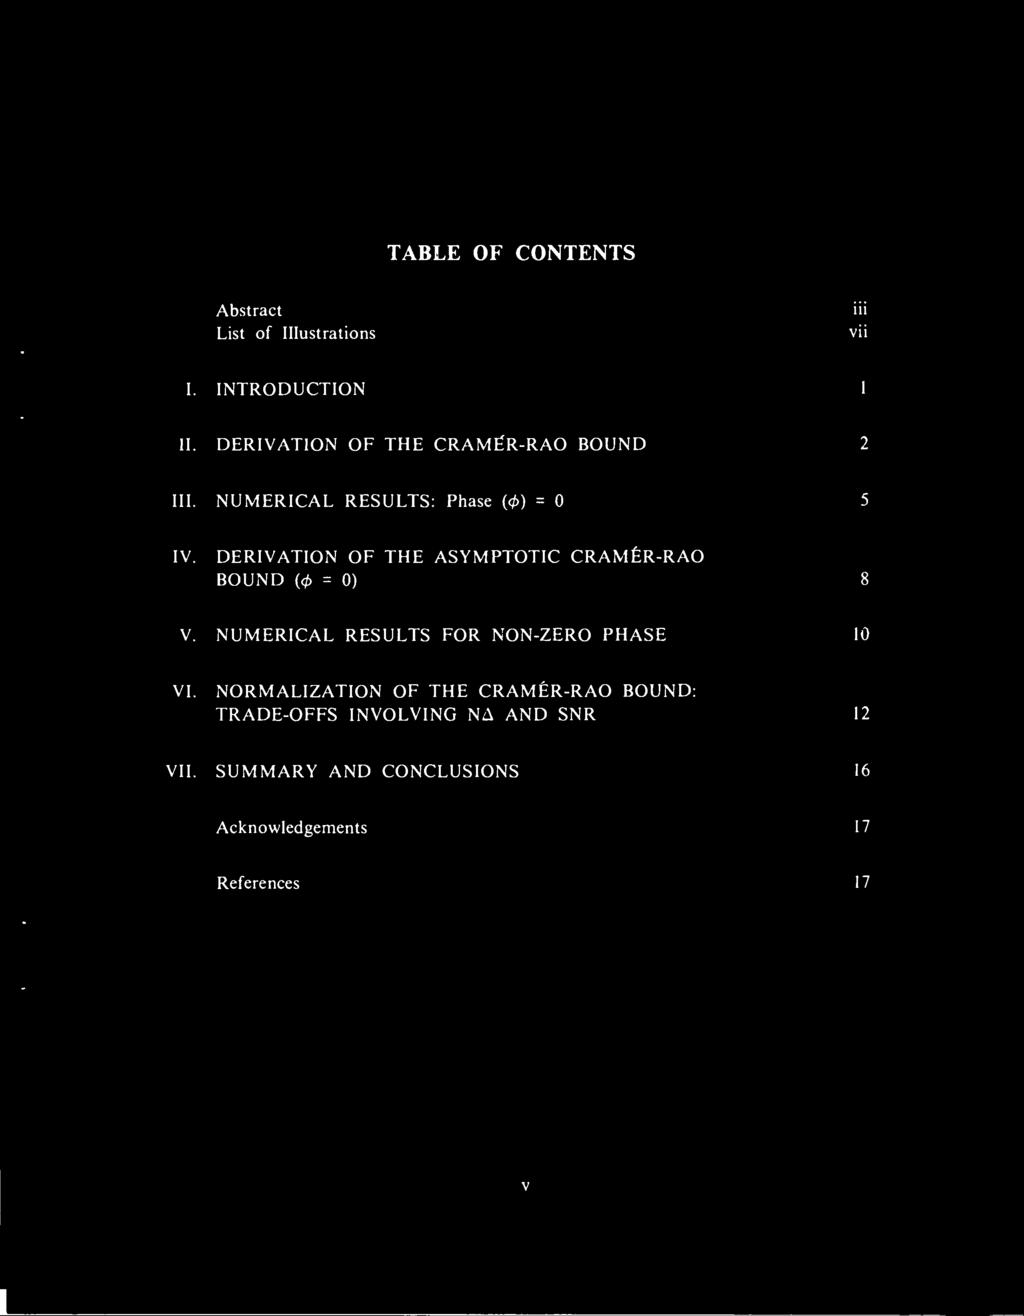 TABLE OF CONTENTS Abstract iii List of Illustrations vii I. INTRODUCTION 1 II. DERIVATION OF THE CRAM^R-RAO BOUND 2 III. NUMERICAL RESULTS: Phase (4>) = 0 5 IV.